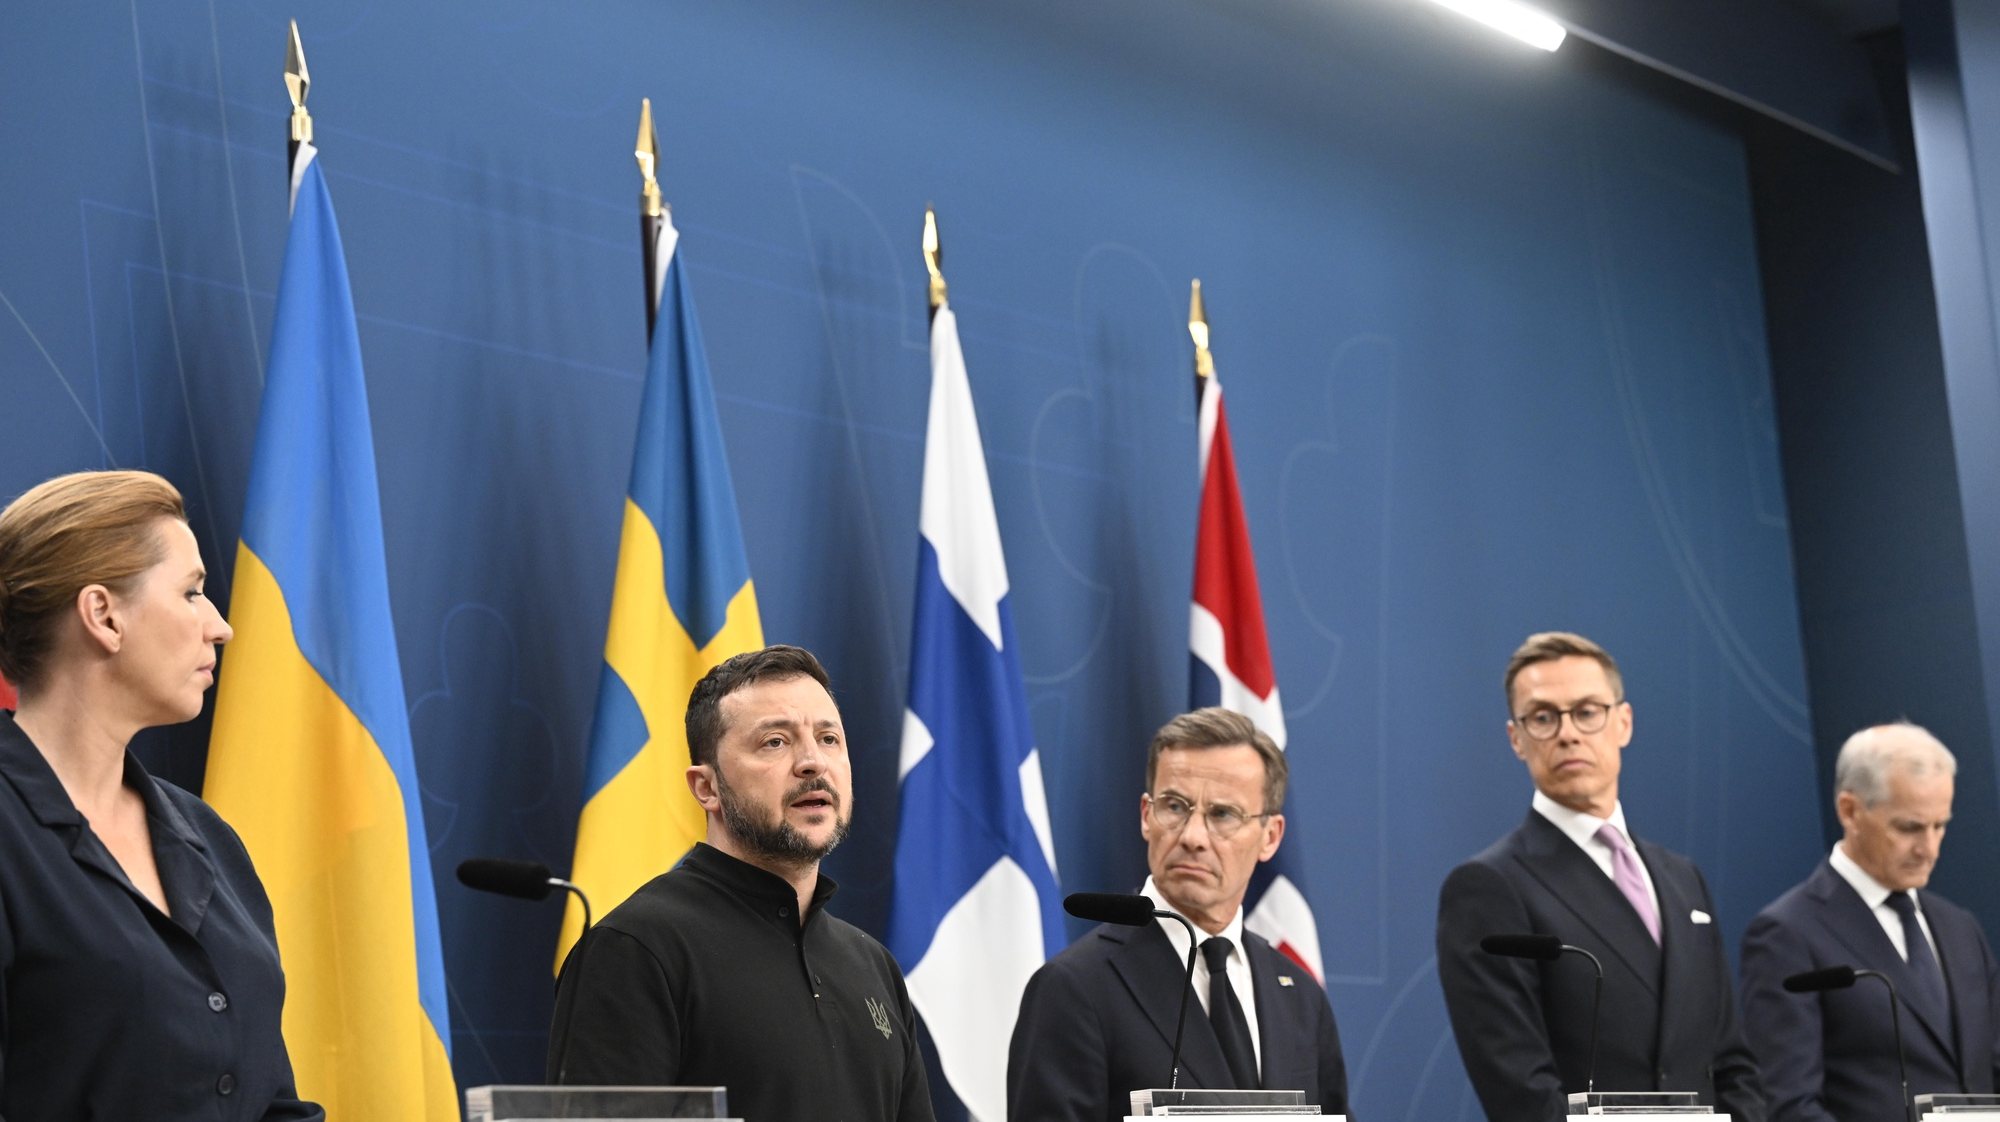 epa11381504 (L-R) Danish Prime Minister Mette Frederiksen, Ukrainian President Volodymyr Zelensky, Swedish Prime Minister Ulf Kristersson, Finnish President Alexander Stubb and Norwegian Prime Minister Jonas Gahr Støre speak at a joint press conference during a Ukraine-Nordic summit in Stockholm, Sweden, 31 May 2024. President Zelensky toured several European countries such as Spain, Belgium and Portugal in the previous days to strengthen bilateral relations, especially cooperation in the field of security and defense support.  EPA/FREDRIK SANDBERG  SWEDEN OUT